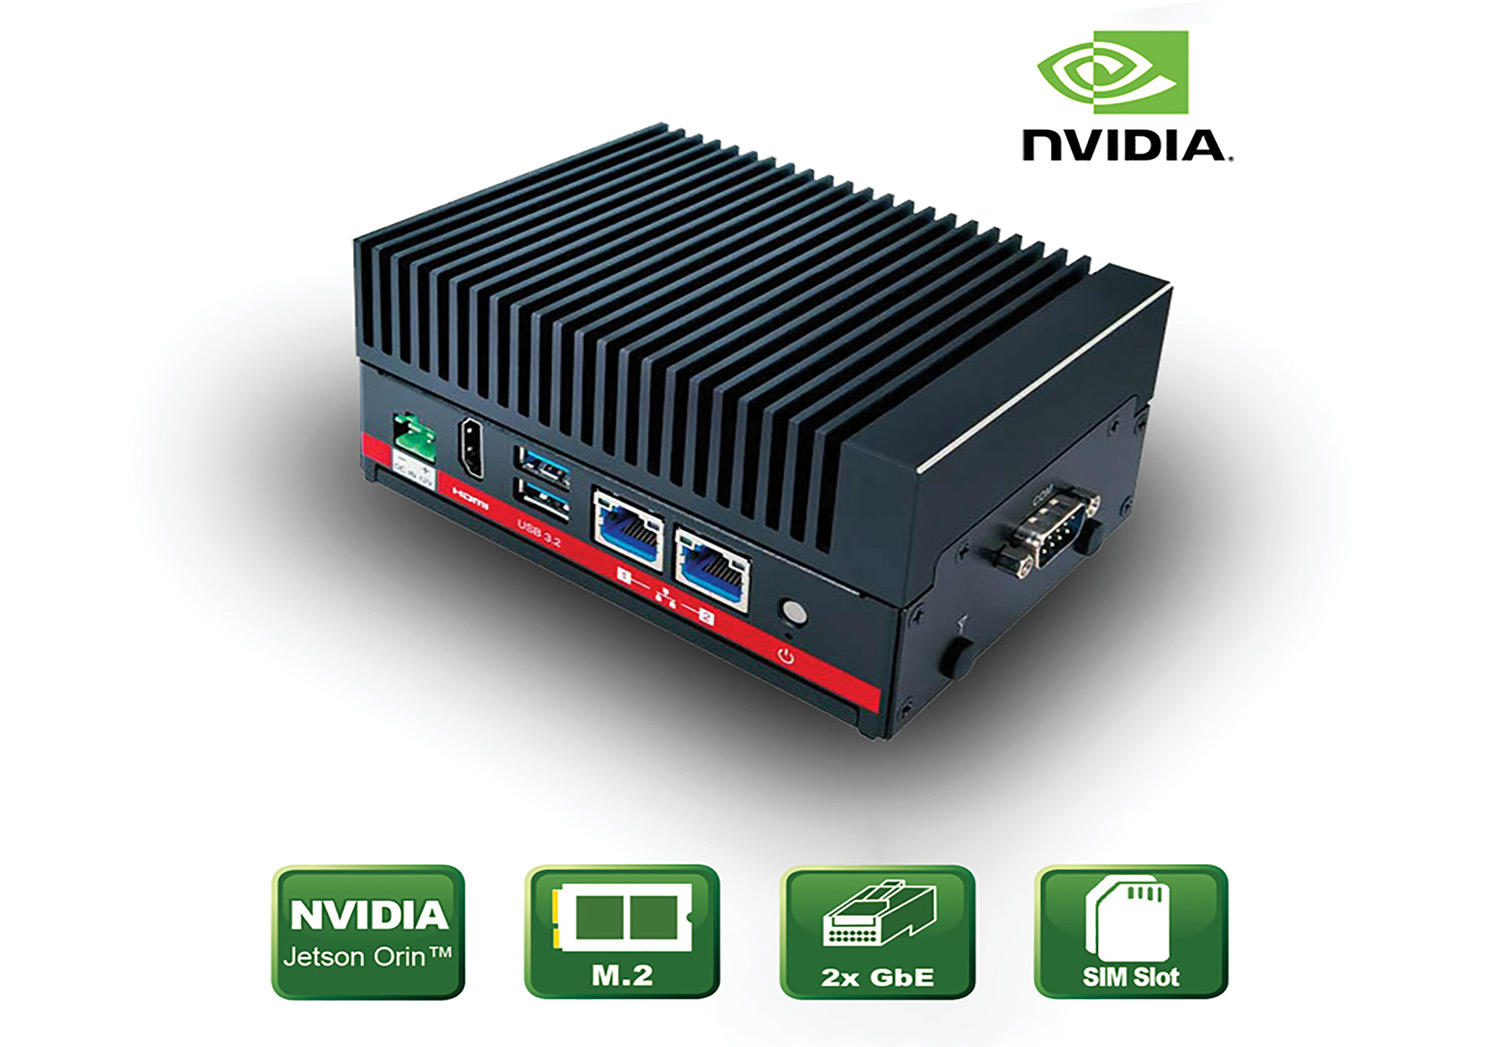 Fanless high performance computer with Nvidia Jetson processor for Edge and AI